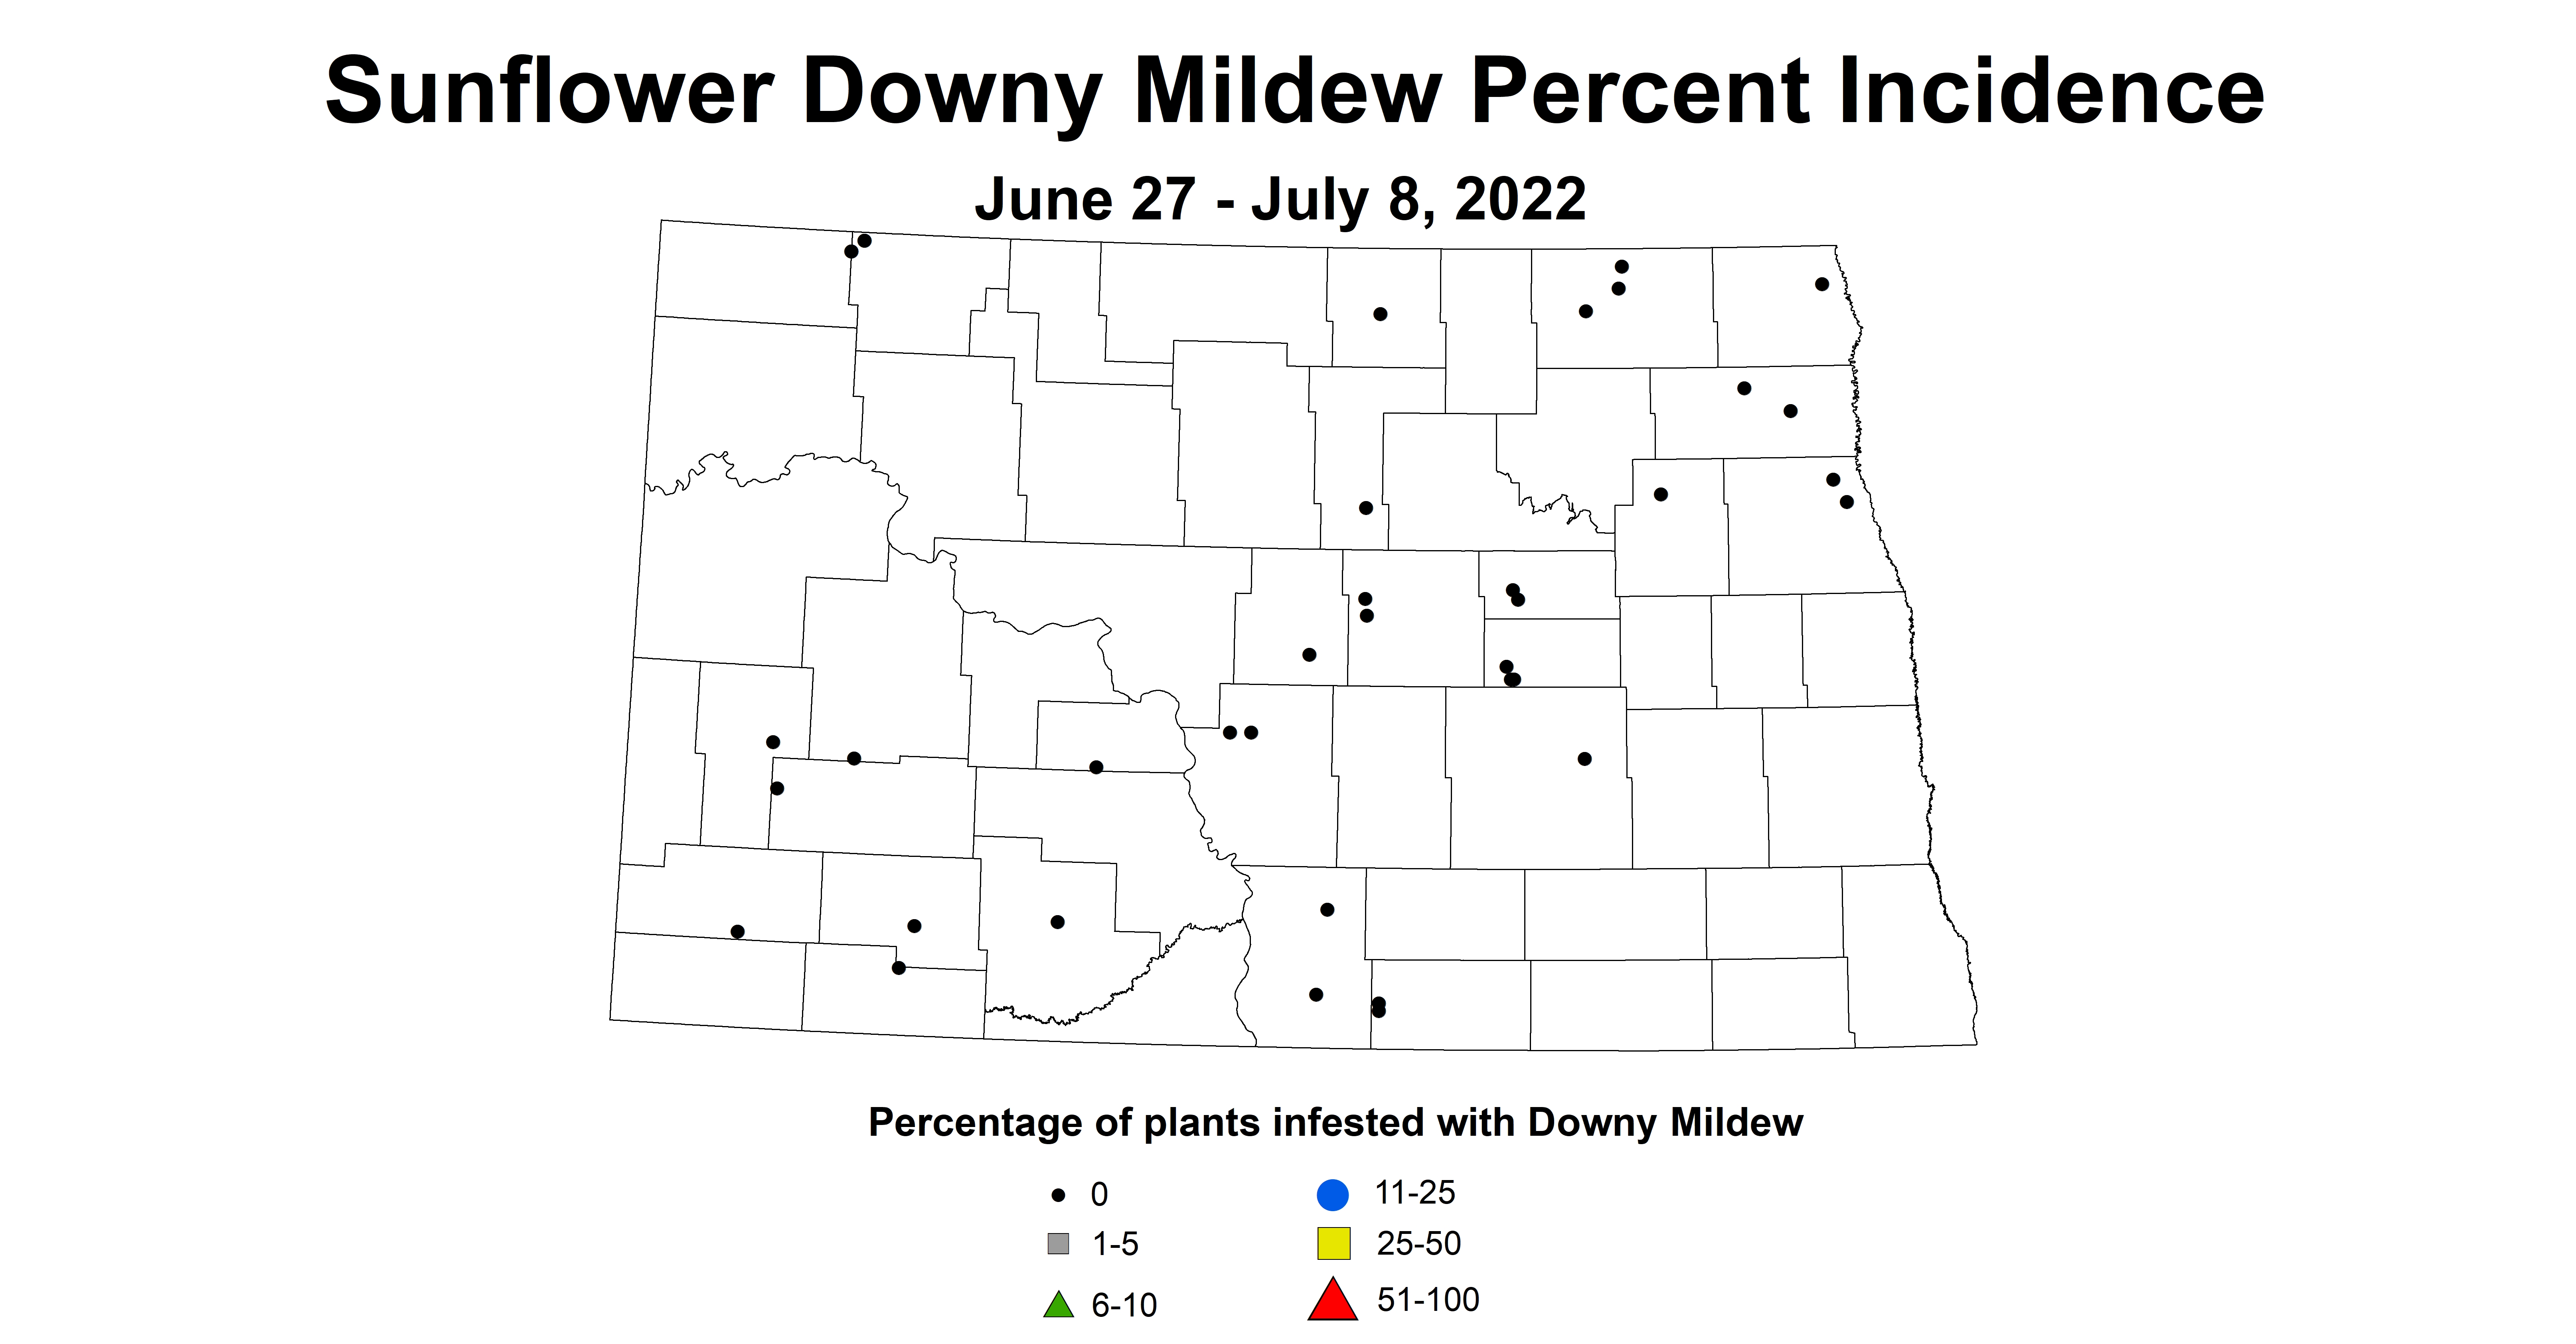 ND IPM map of sunflower downy mildew incidence June 27 to July 8 2022